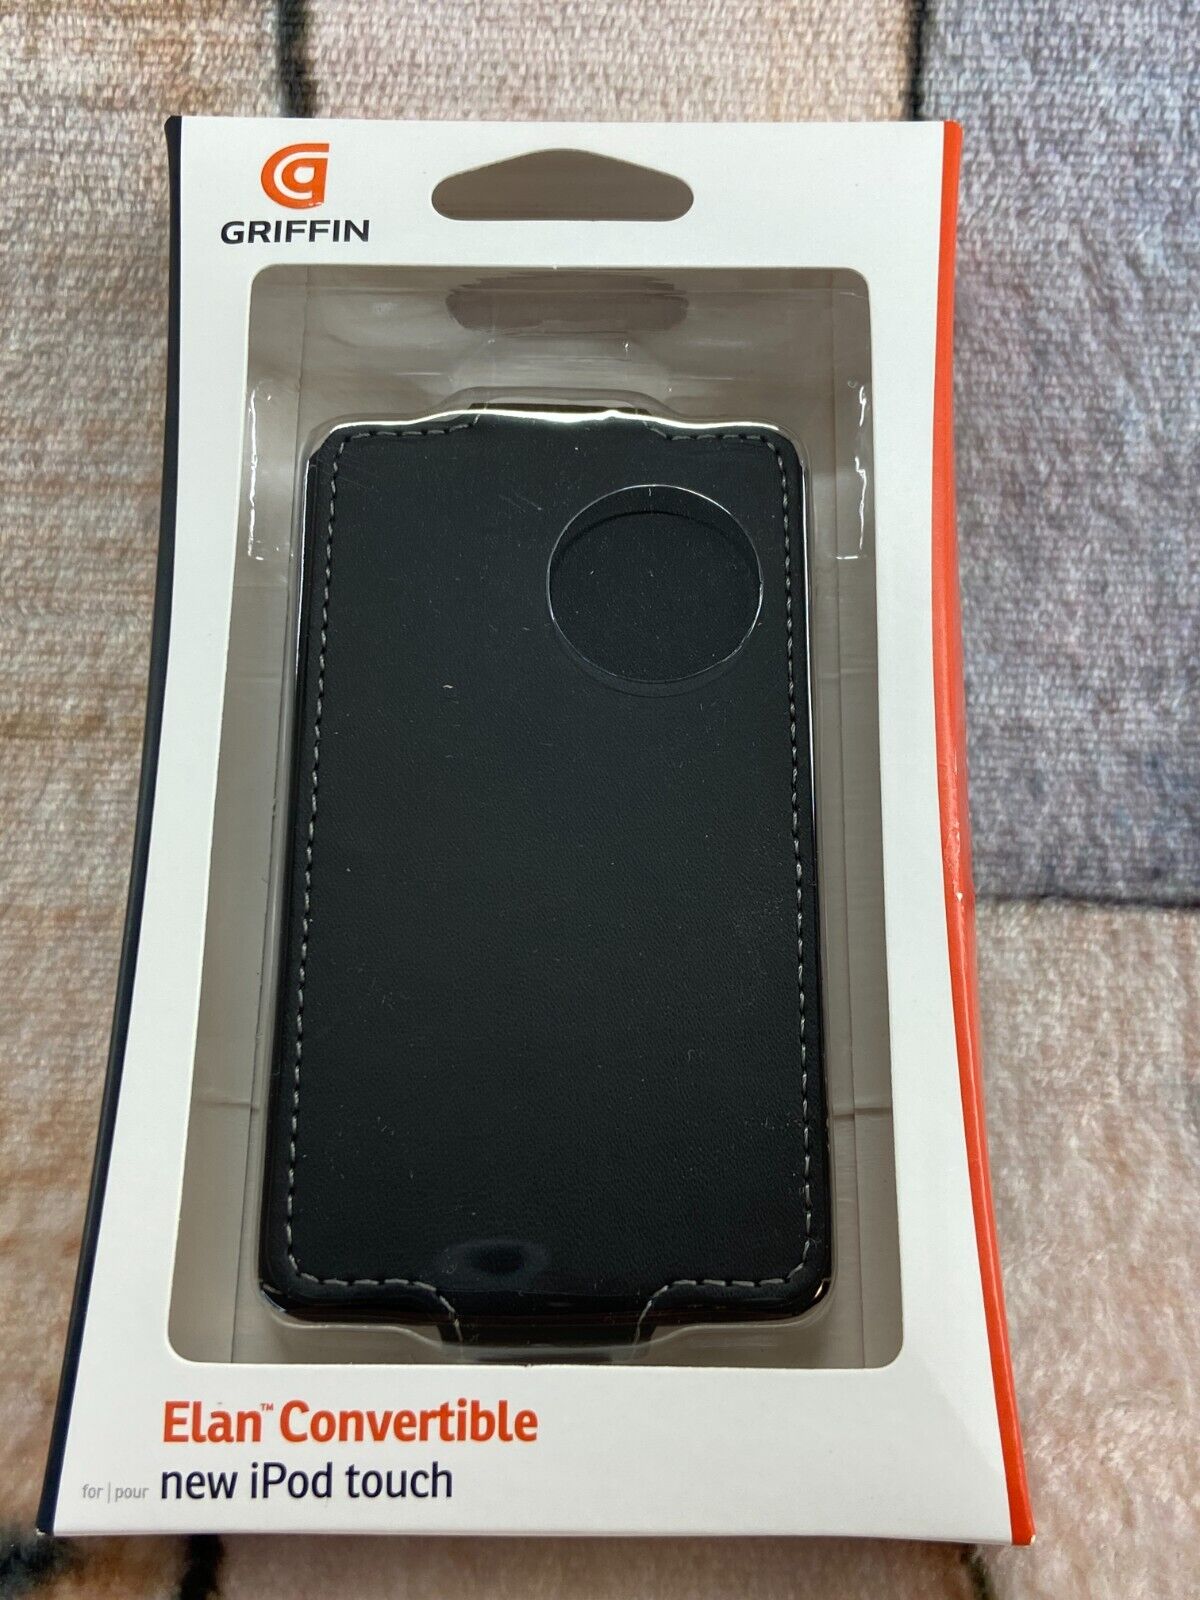 GRIFFIN Elan Convertible Flip Cover Case for Apple iPod Touch 4th Gen NIB